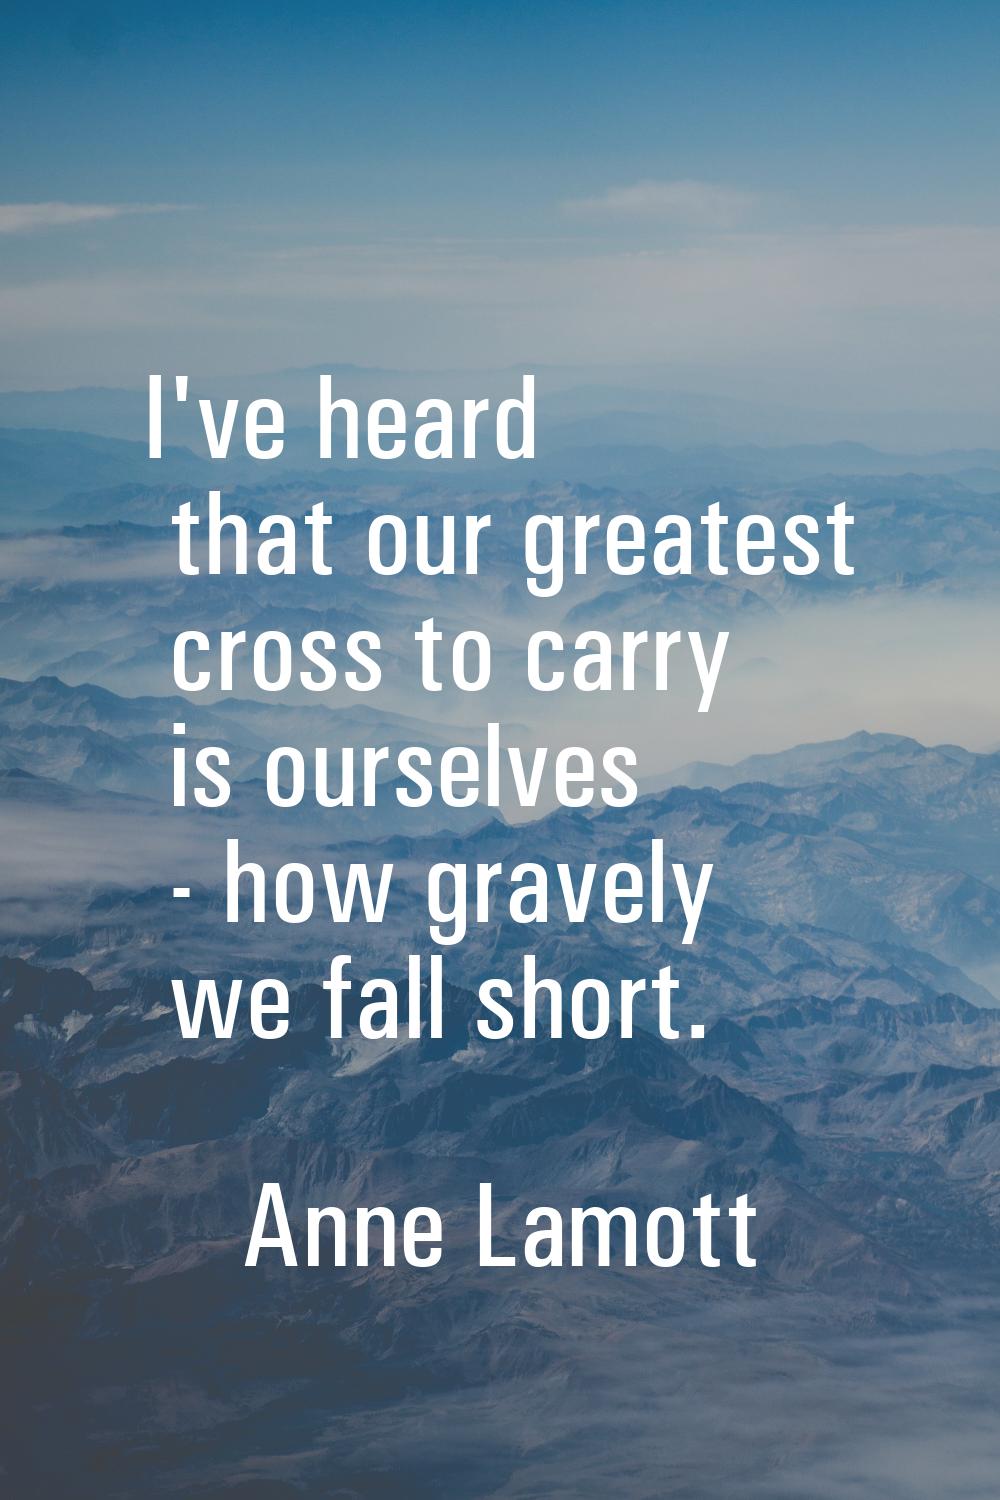 I've heard that our greatest cross to carry is ourselves - how gravely we fall short.